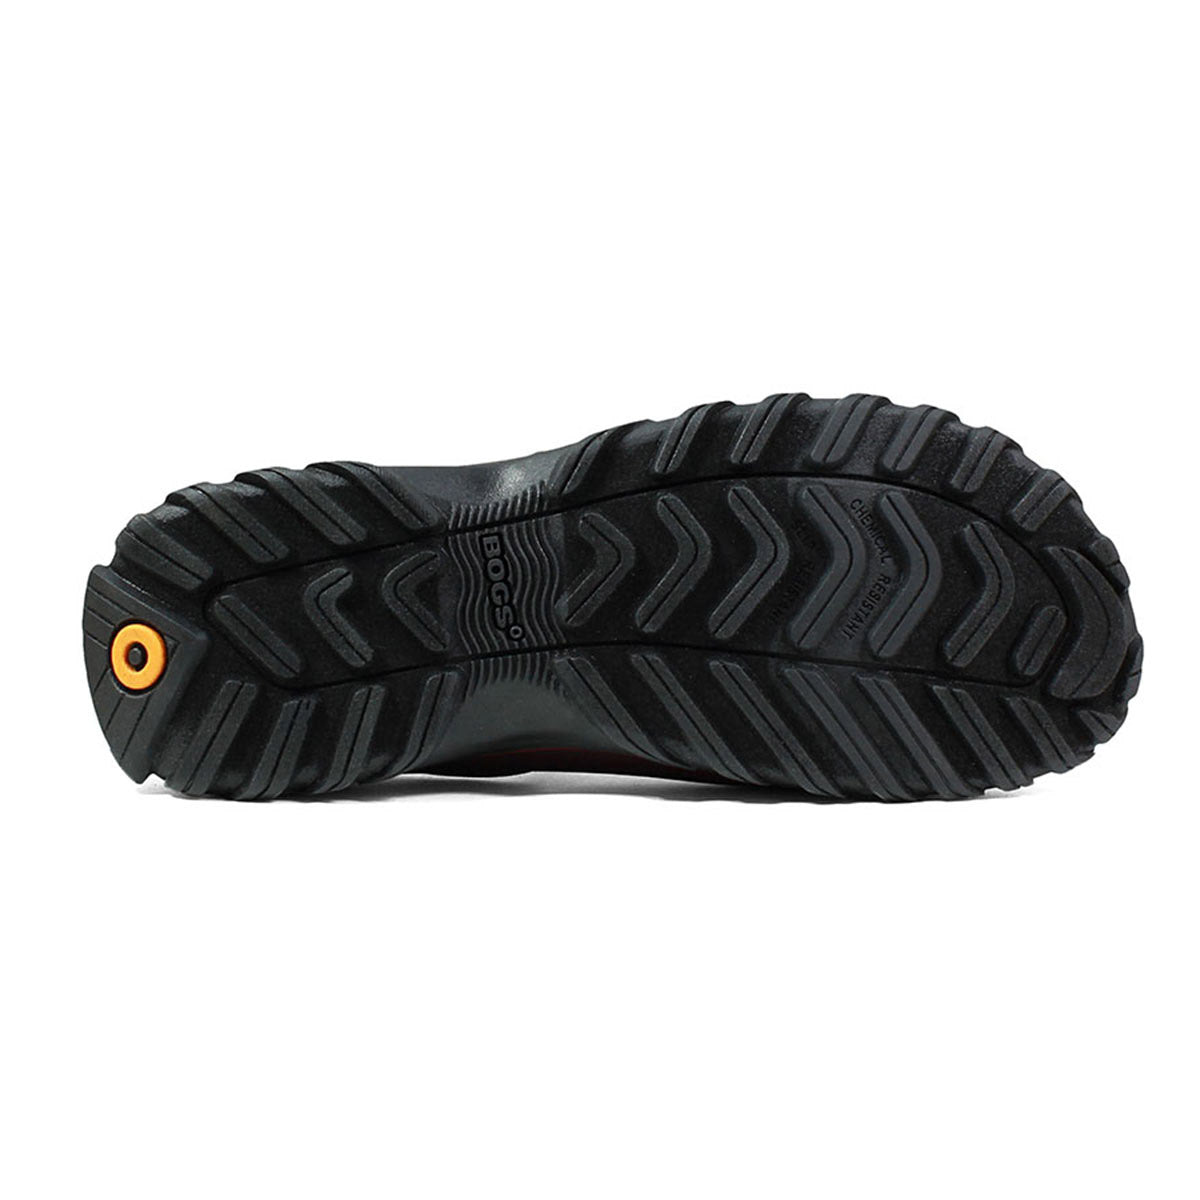 Black BioGrip slip-resistant outsole of a BOGS SAUVIE SLIP ON BLACK - MENS with tread pattern and a circular orange logo.